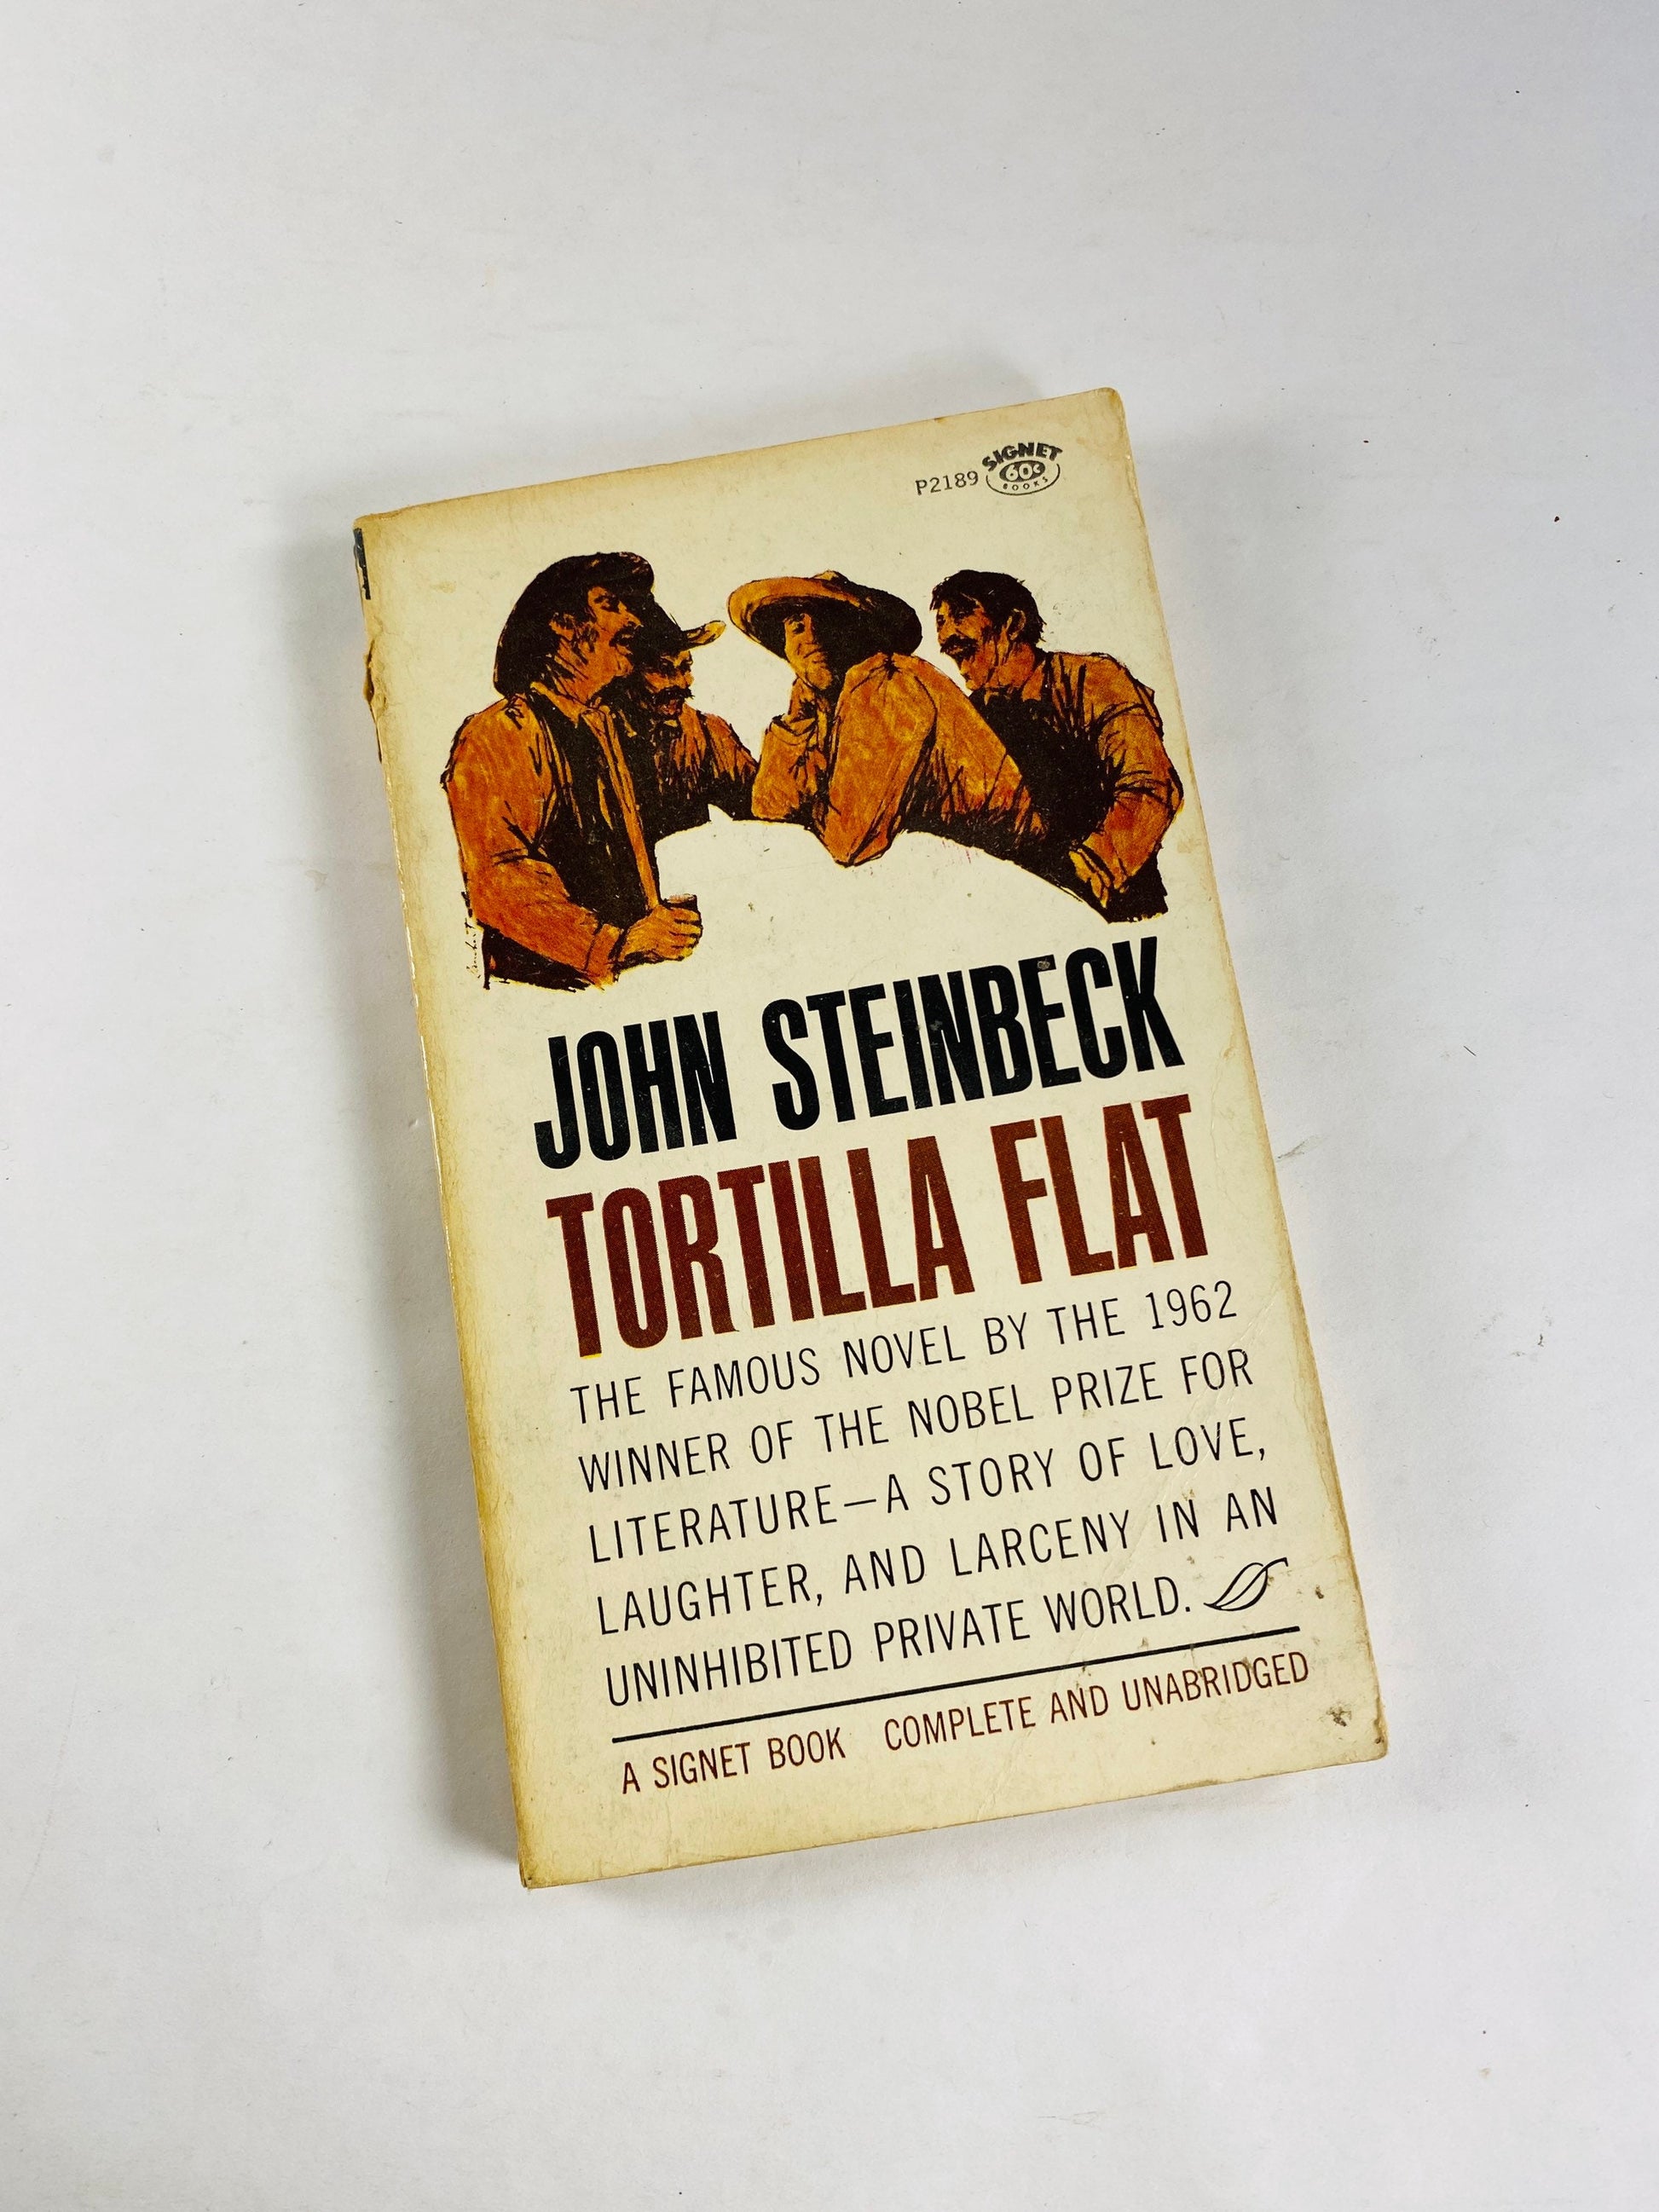 John Steinbeck Tortilla Flat vintage Signet paperback book circa 1963 Men and women who live with zestful abandon. New American Library